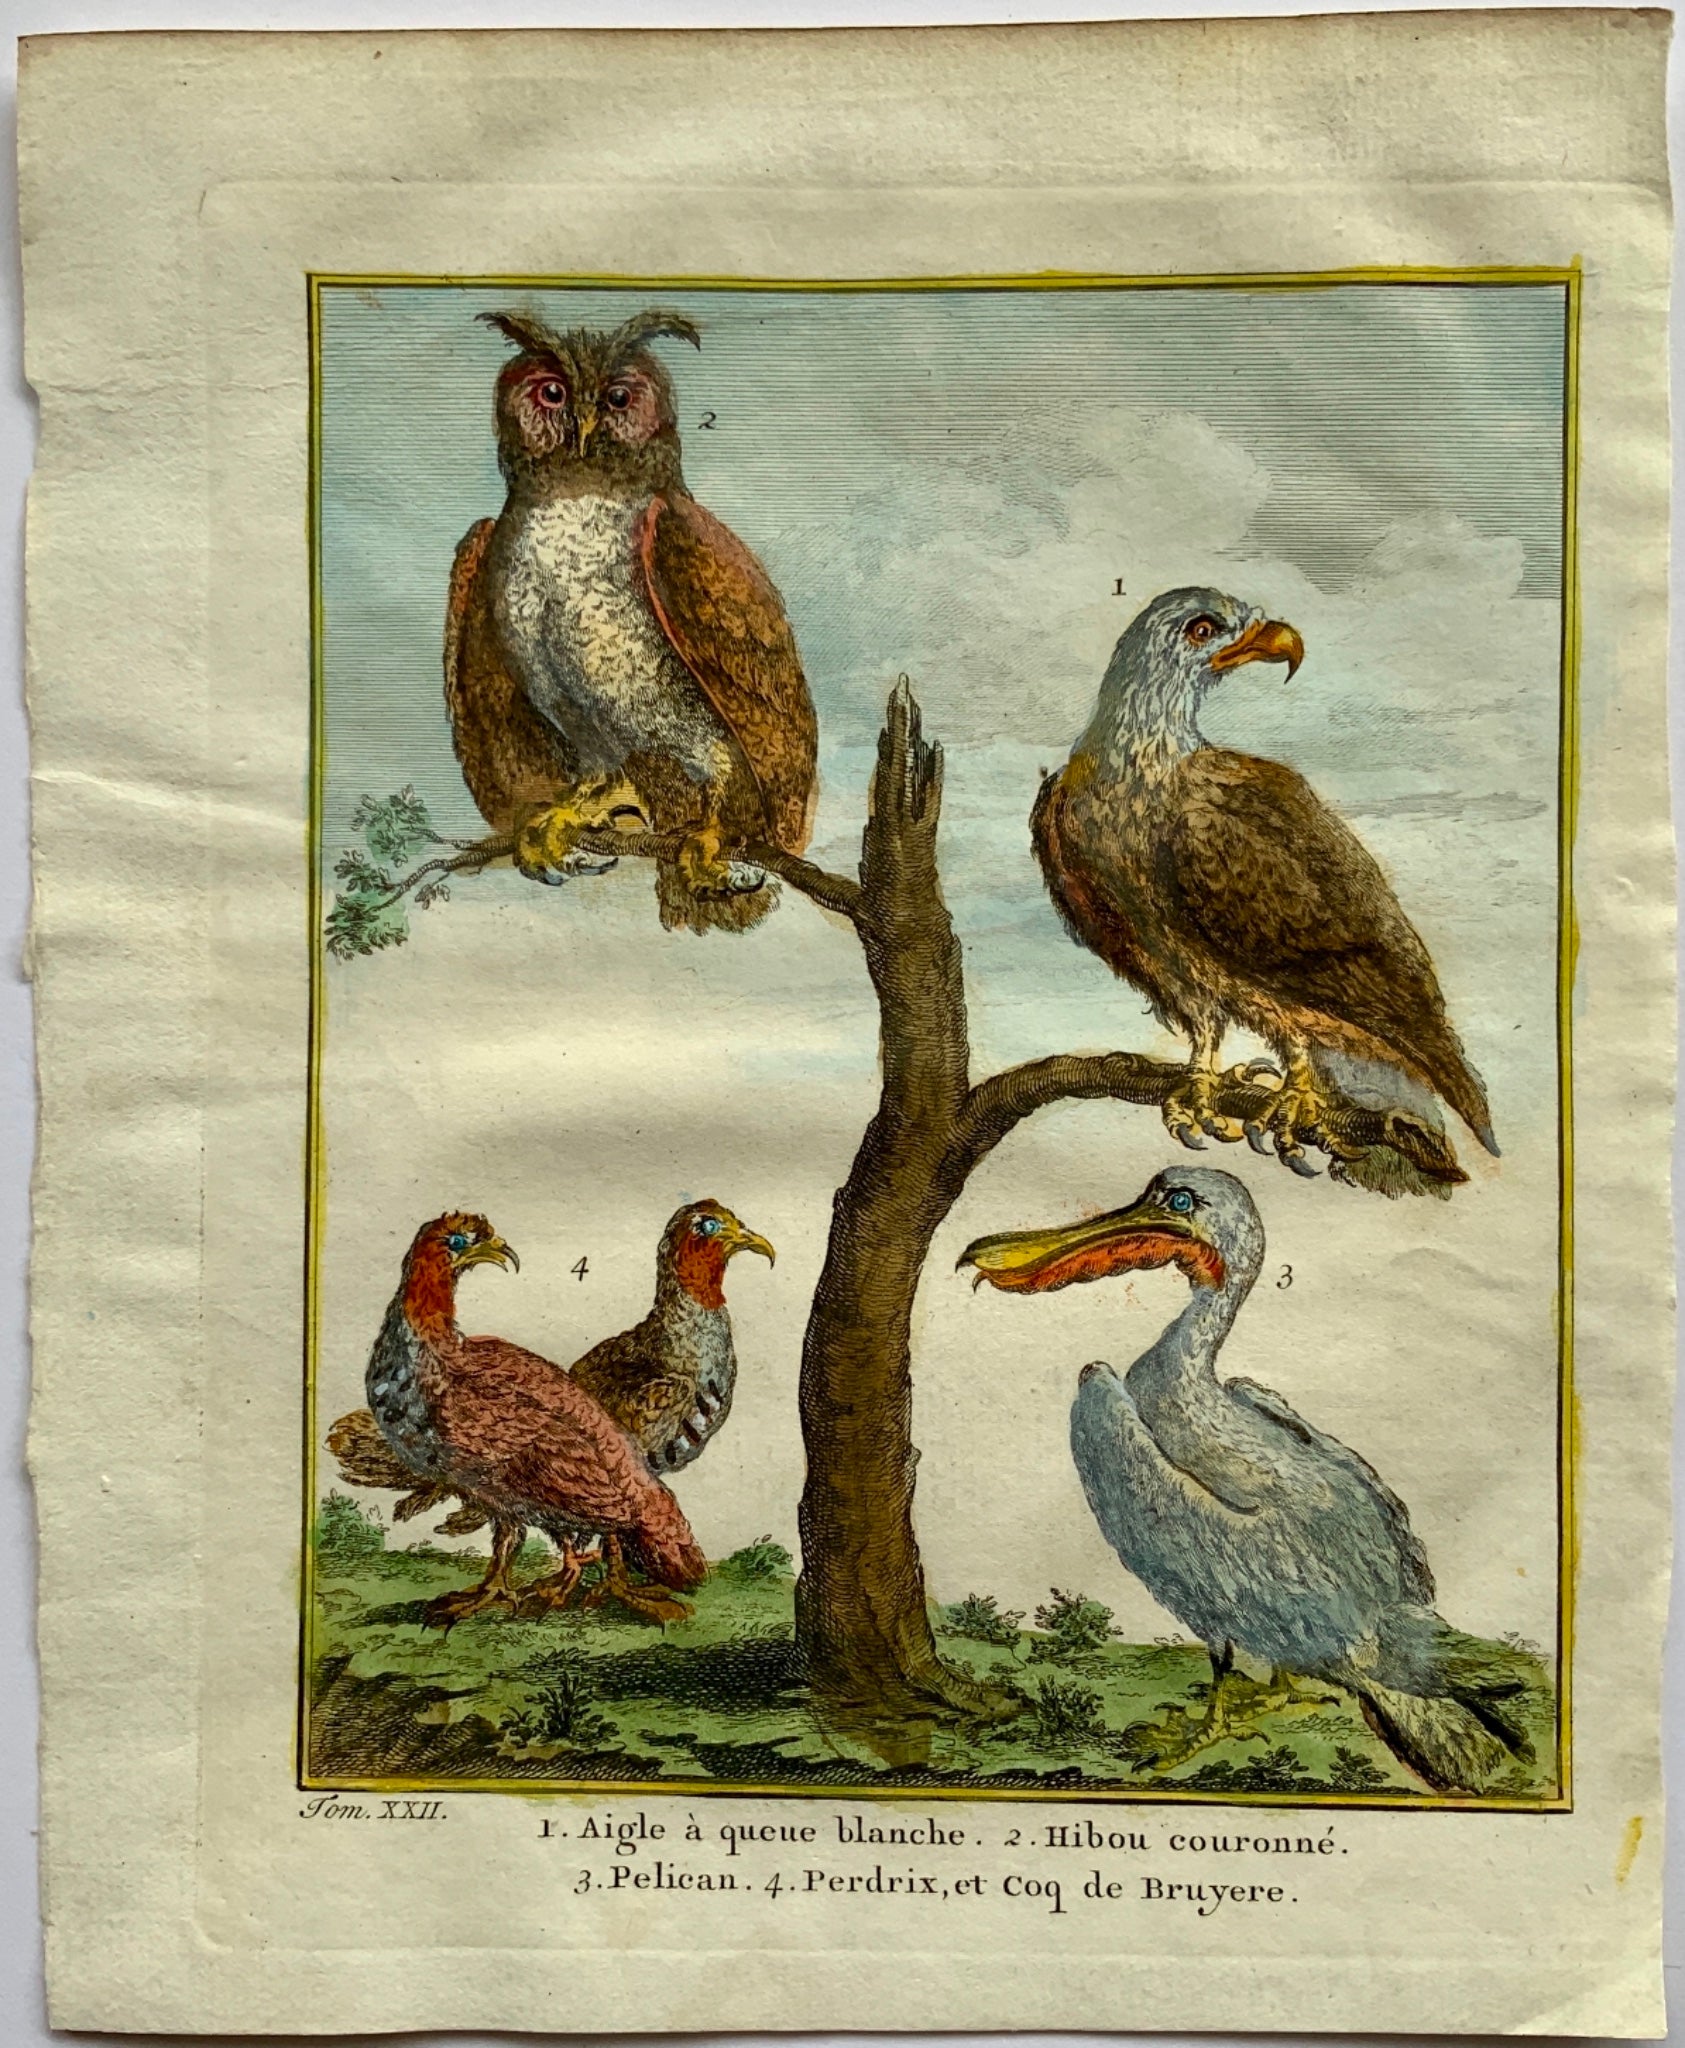 1750 Prevost - White Tailed Eagle Crowned Owl Pelican Partridge - Ornithology